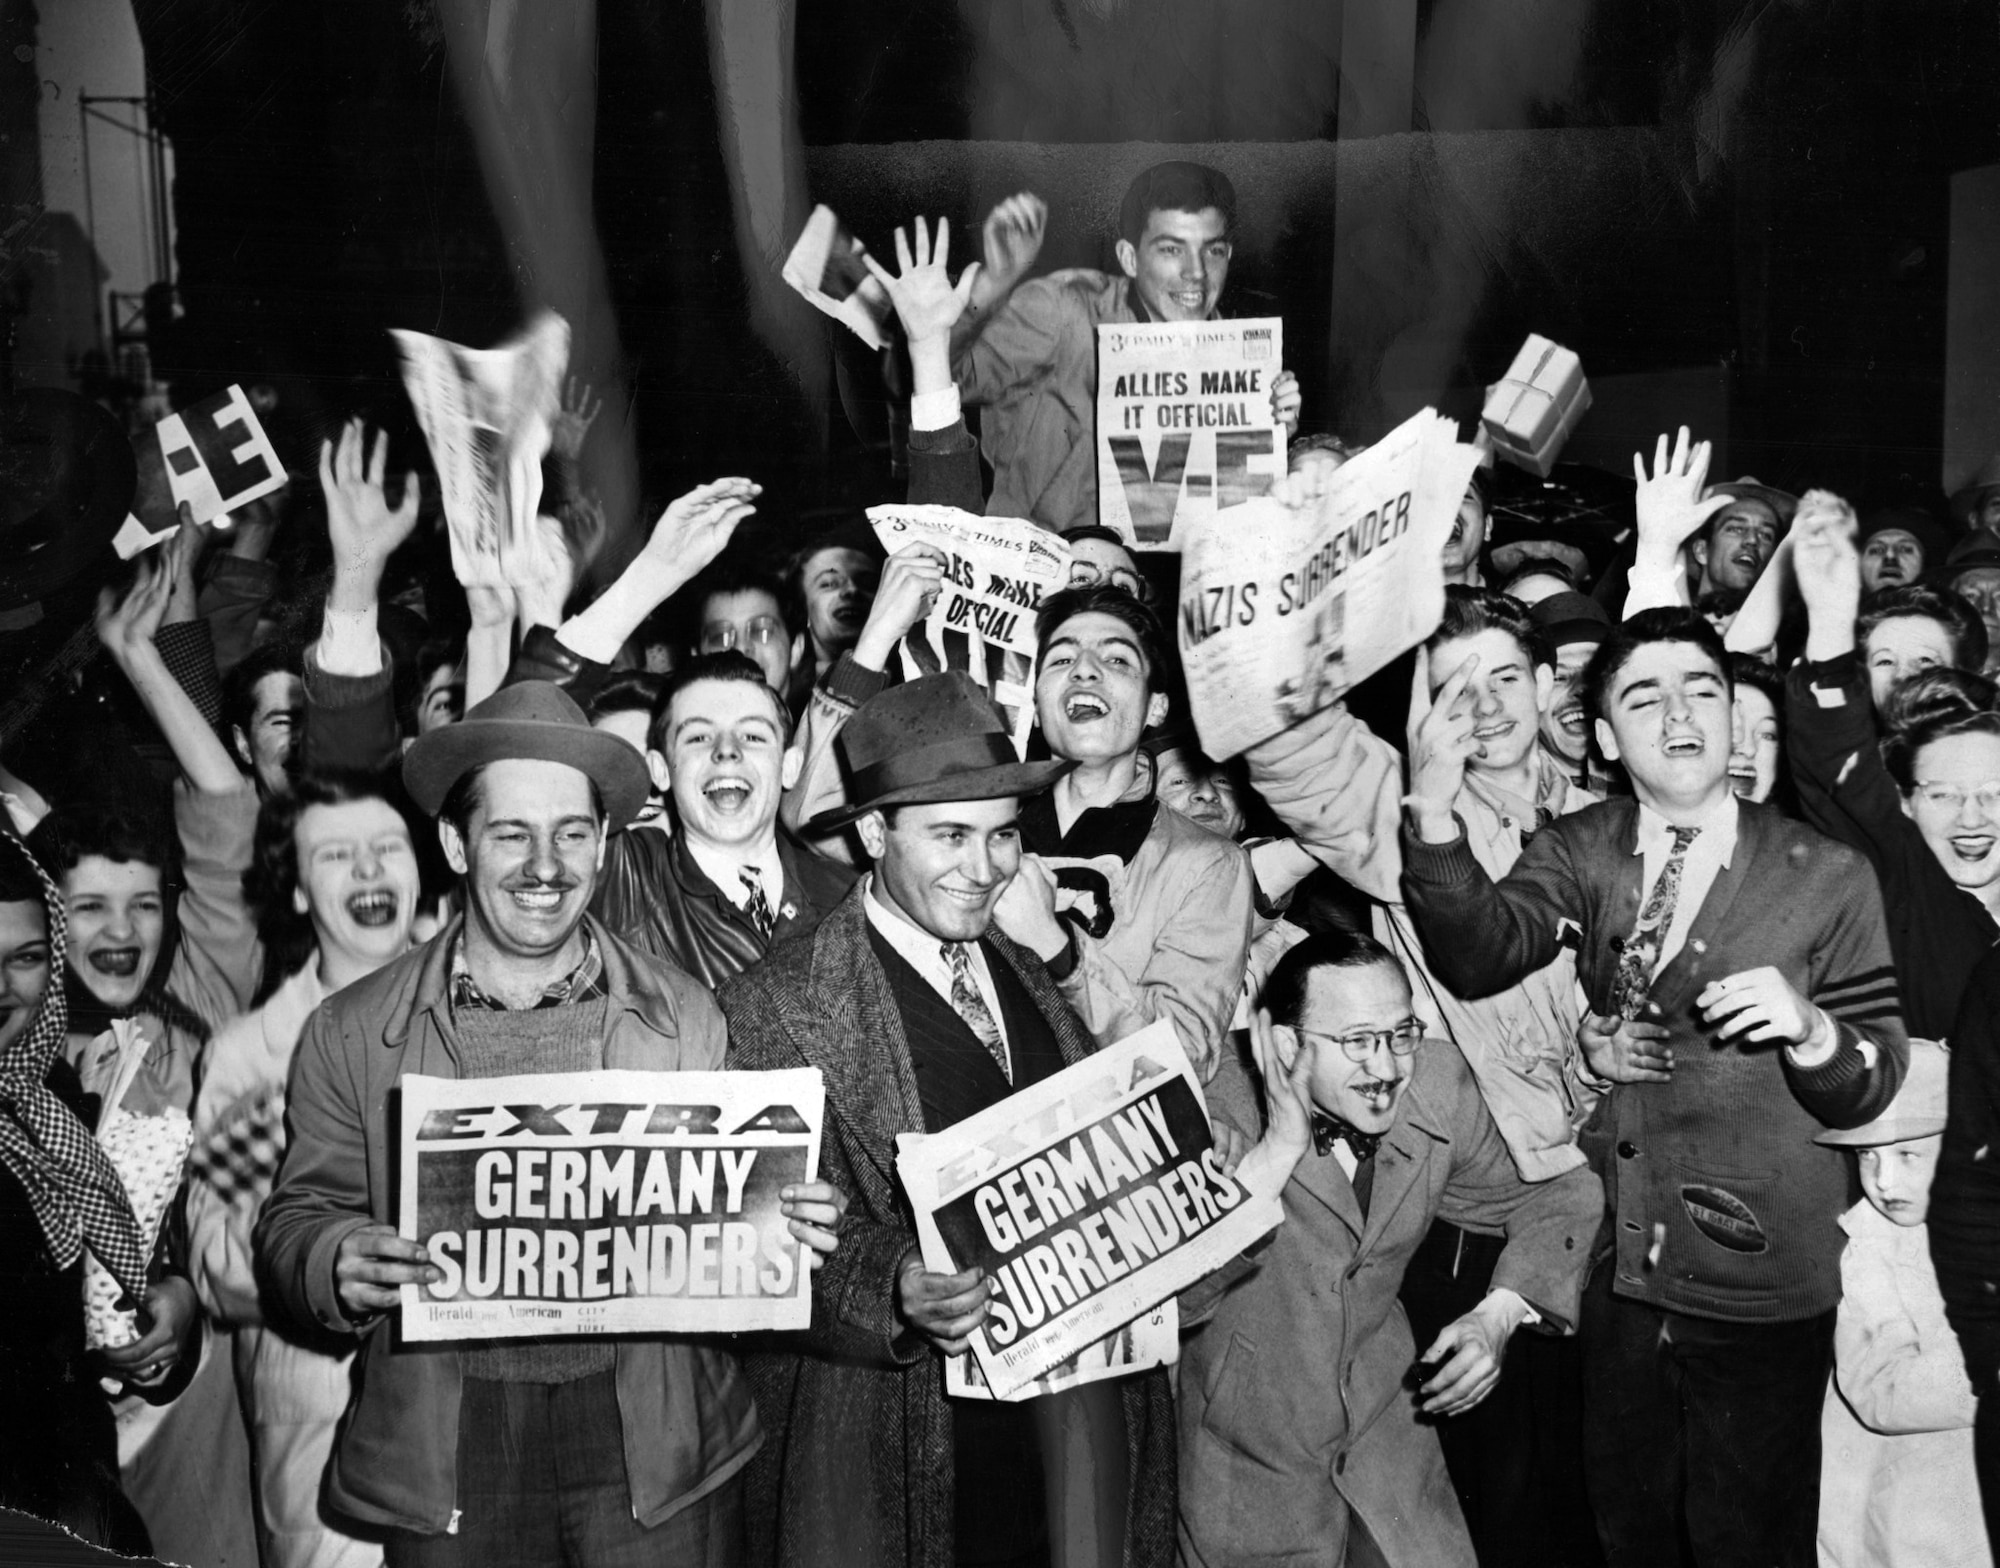 Celebrated in both Great Britain and the United States, Victory in Europe symbolizes the end of World War II in Europe May 8, 1945. Cities in both nations put out flags and banners, celebrating the defeat of Nazi Germany. (Courtesy Photo)